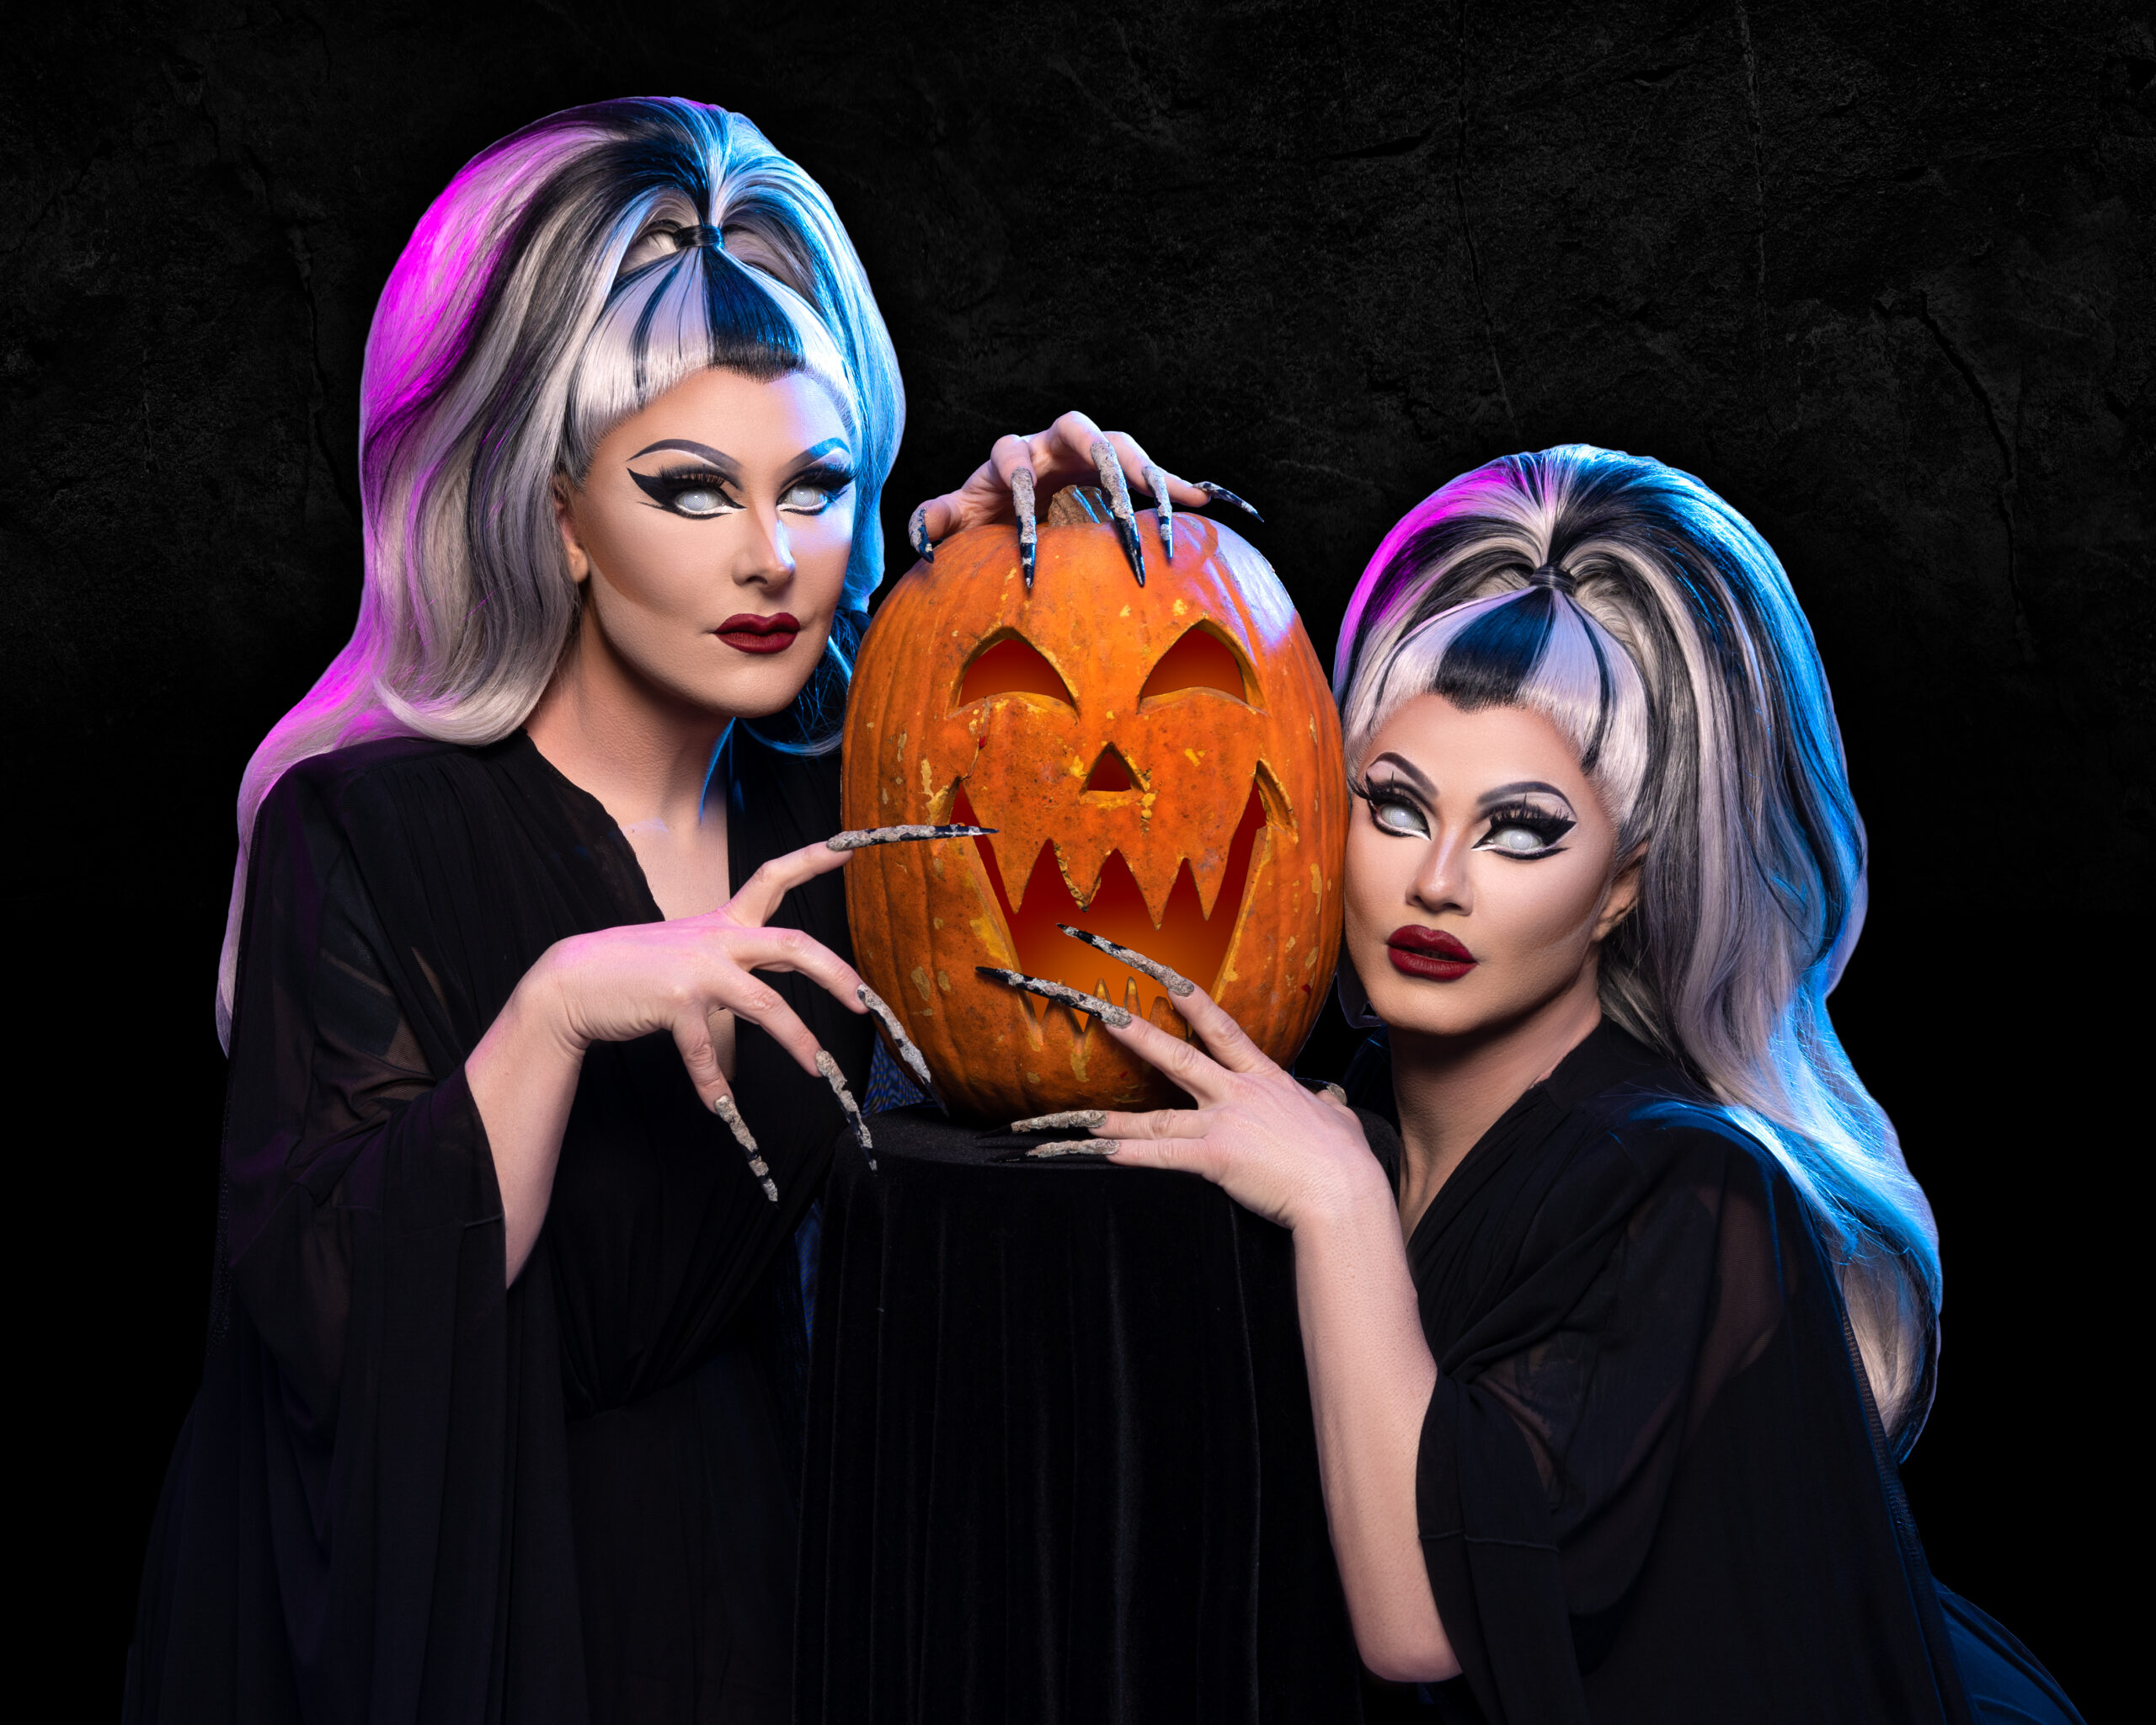 The Boulet Brothers Halfway to Halloween TV Special